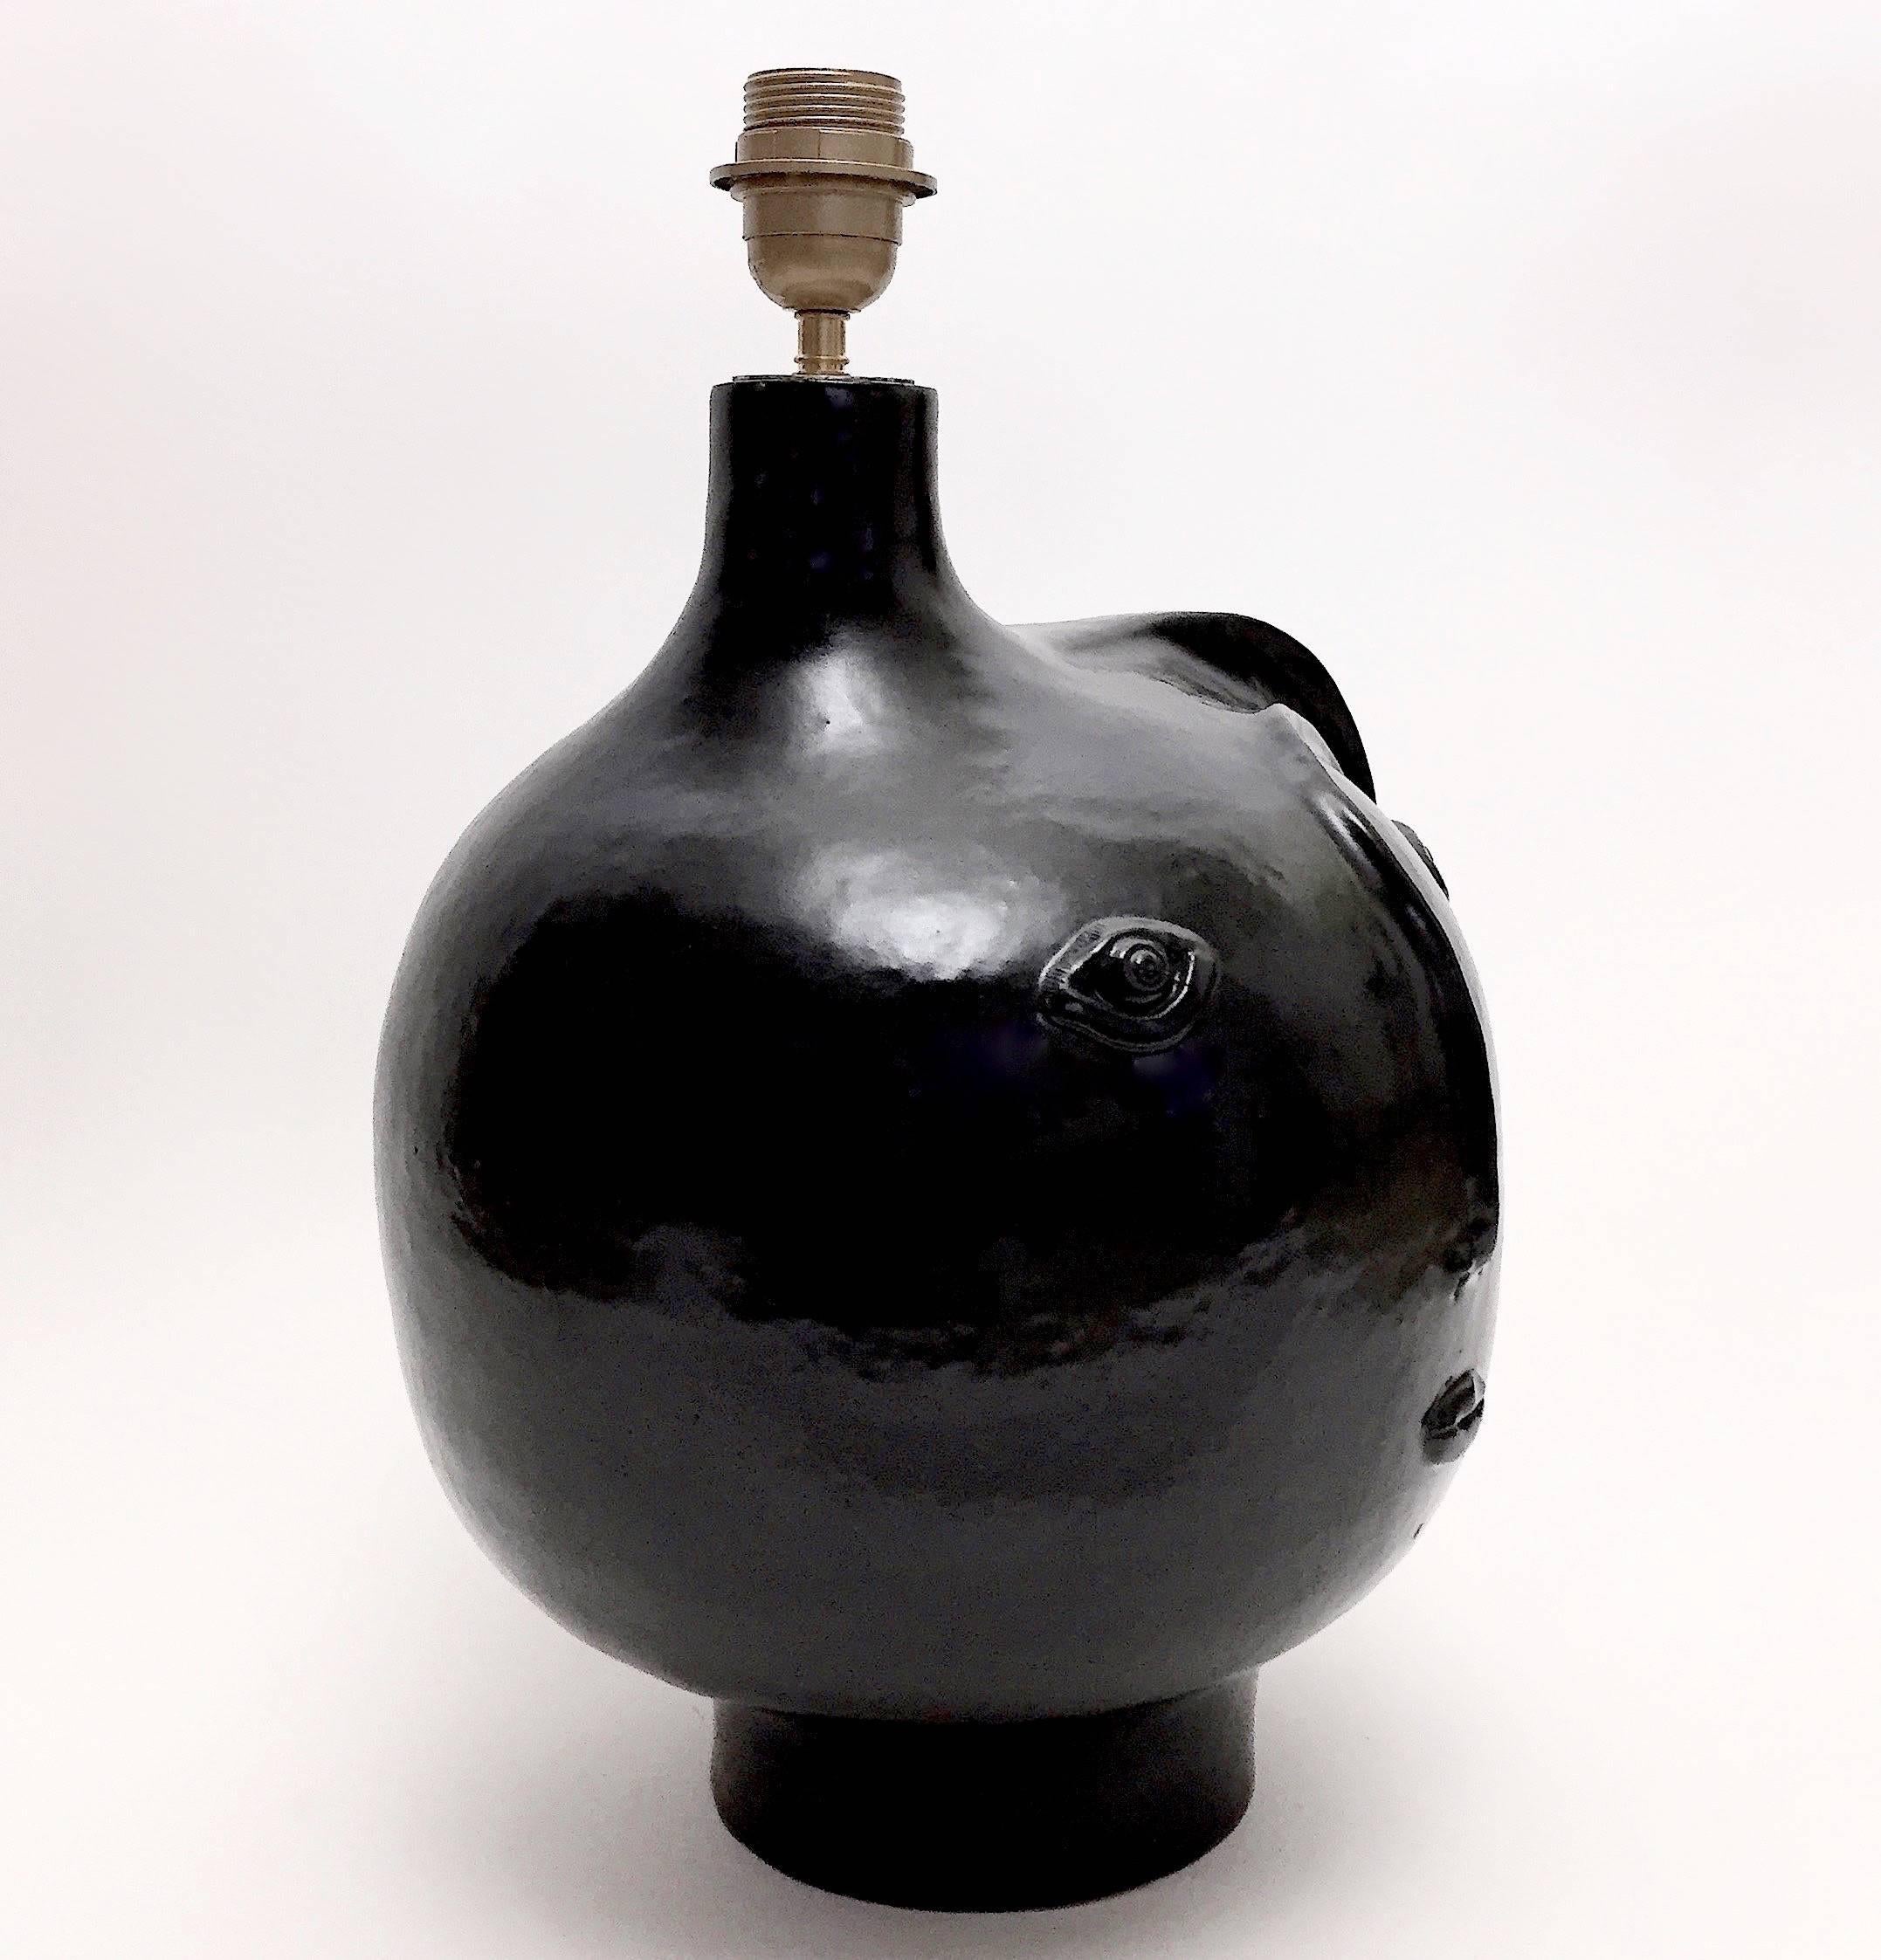 Handmade biomorphic sculpture forming lamp-base.
Stoneware glazed in glossy black, decorated with stylized visage sculpted in front.
One of a kind ceramic piece designed and signed by the French ceramicists, Dalo. 

The height measurement is for